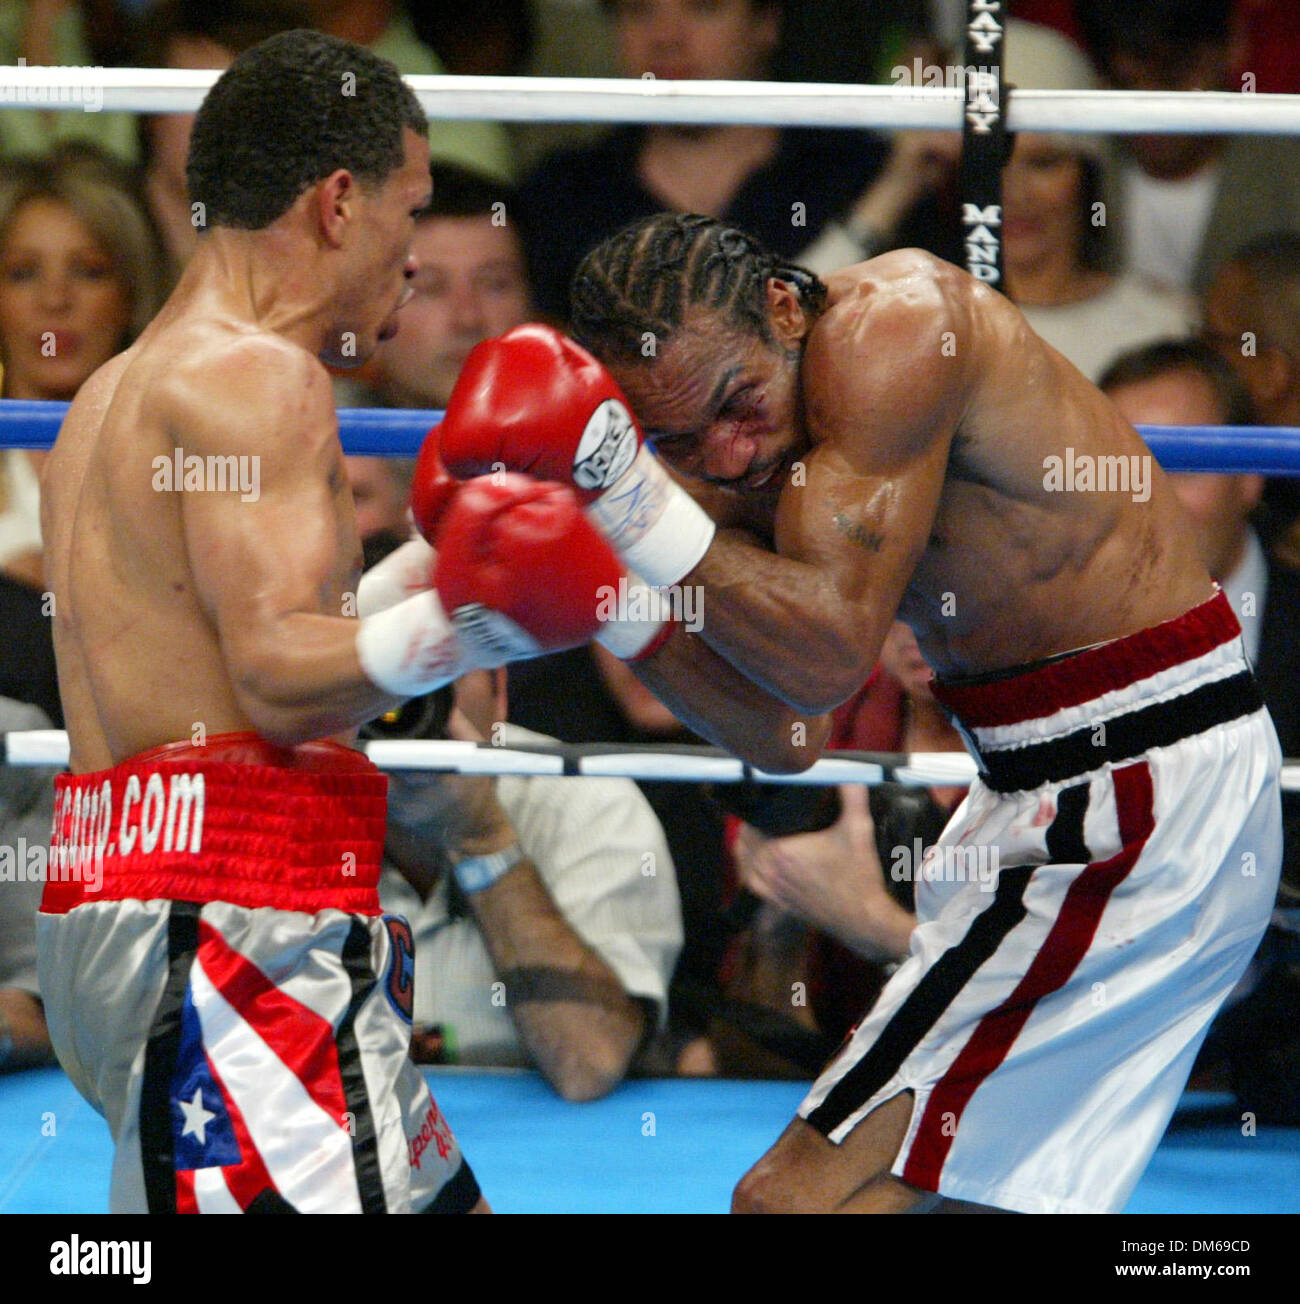 Dec 11, 2004; Las Vegas, NV, USA; WBO Junior Welterweight Champion MIGUEL COTTO (L) from Puerto Rico  on the attack against RANDALL BAILEY at the Mandalay Bay. Cotto retained his title  by TKO in the 6th round over Bailey. Stock Photo